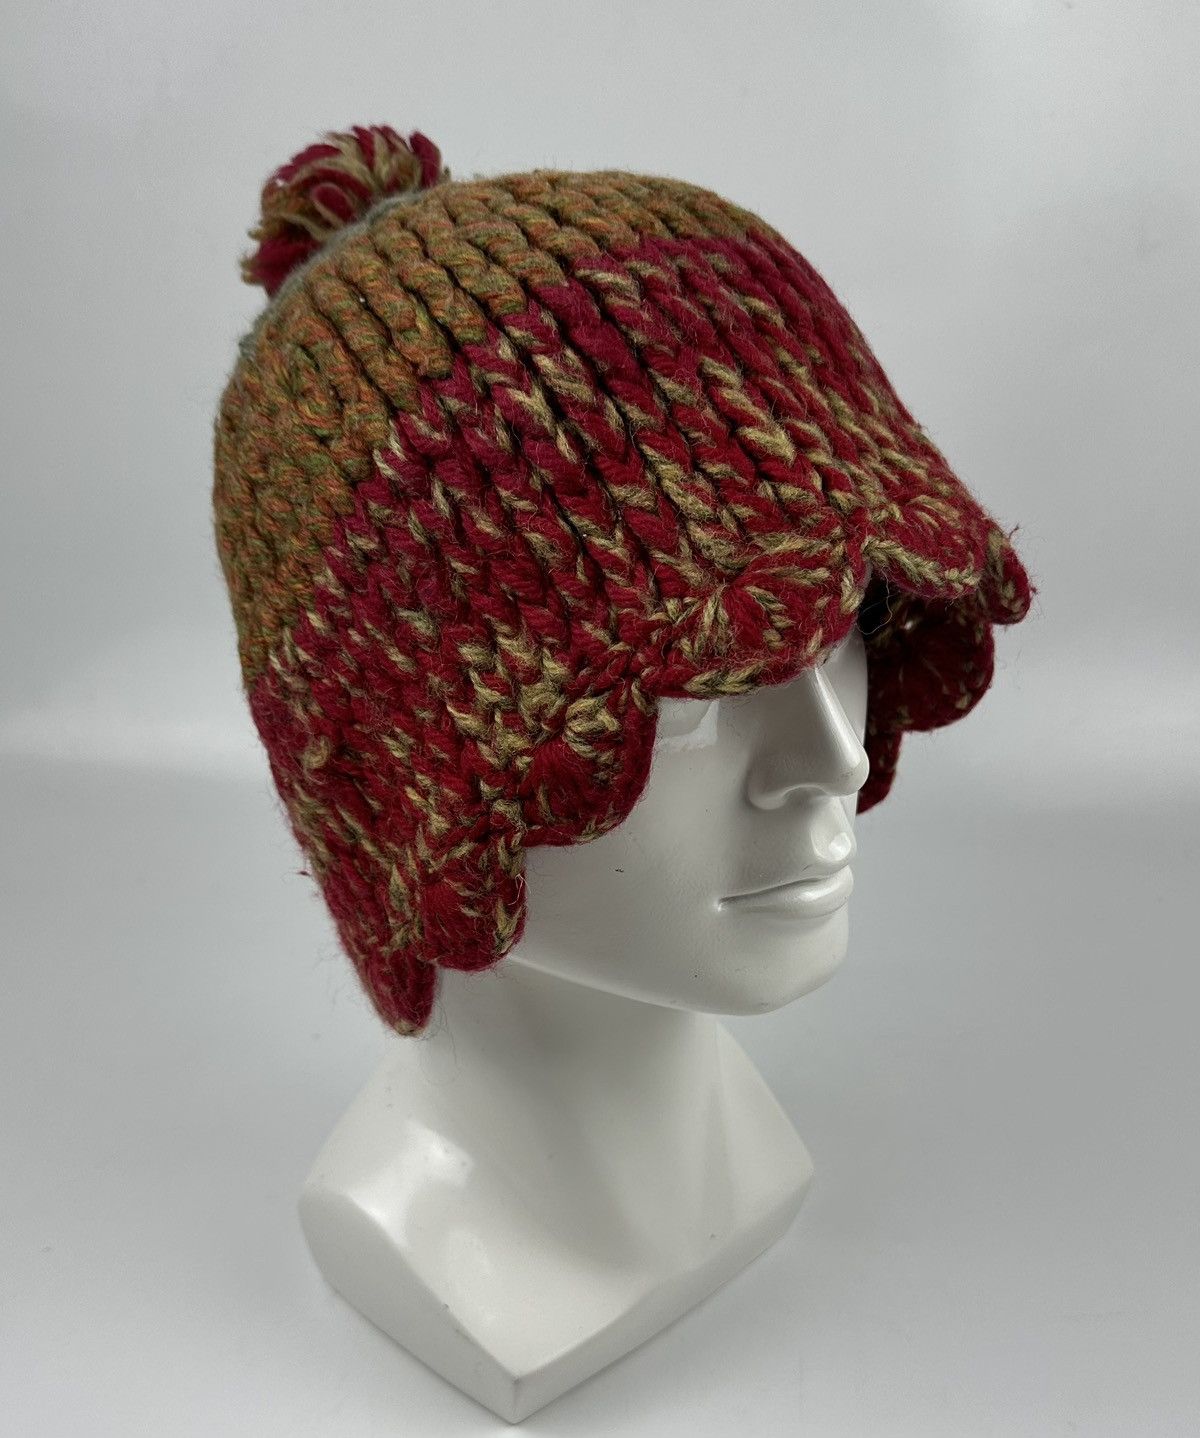 custom made knitted hat tg3 - 1